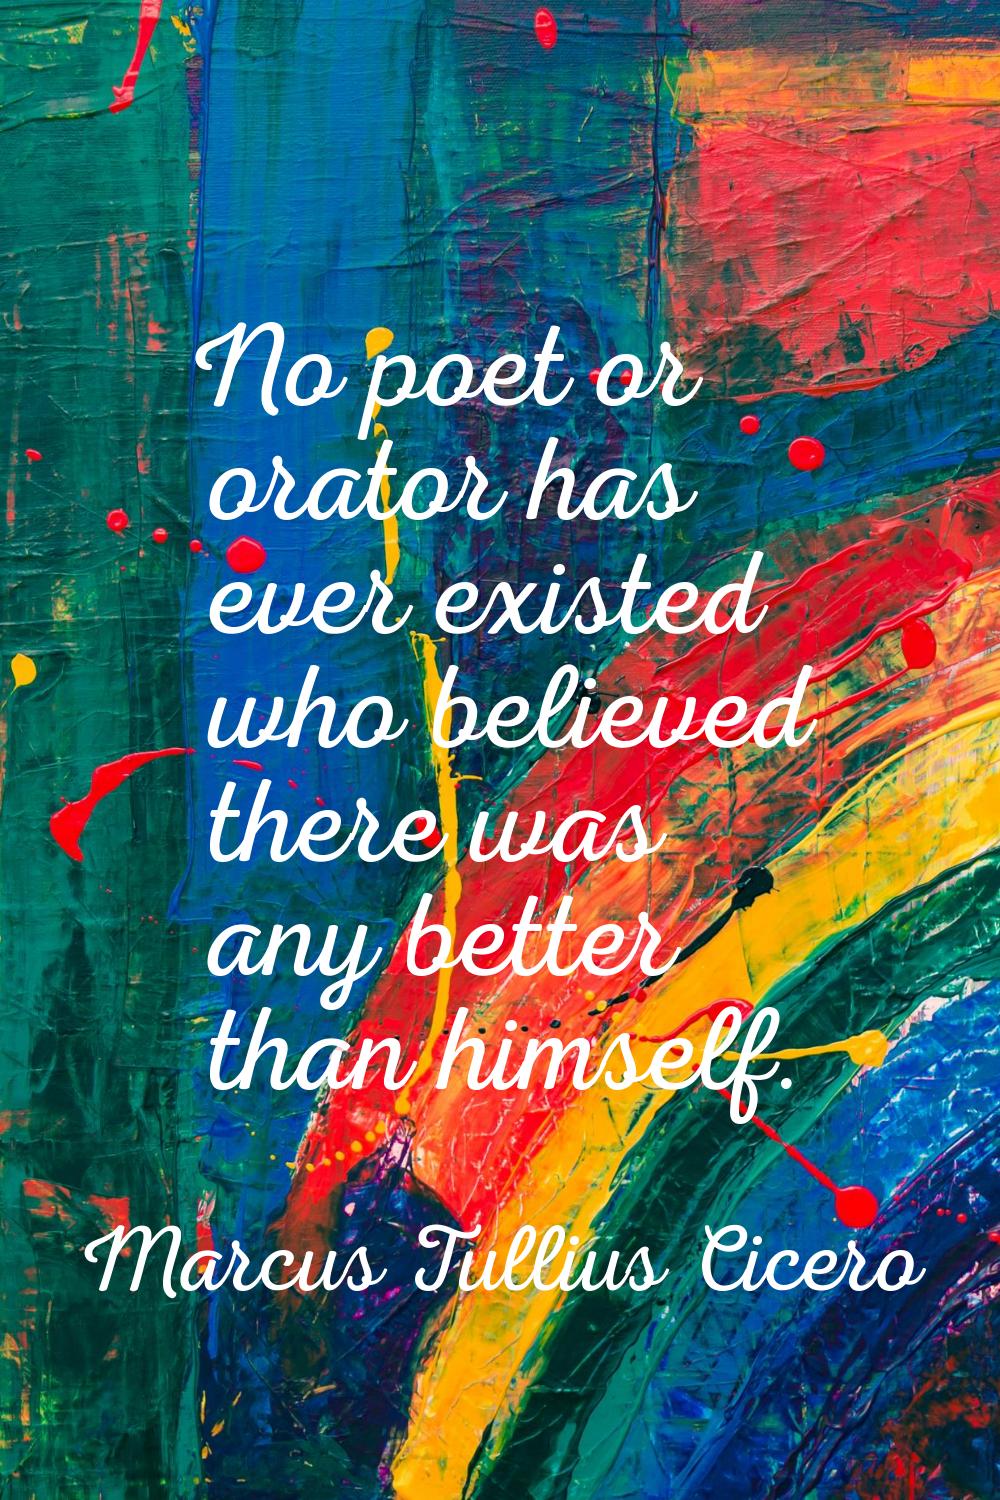 No poet or orator has ever existed who believed there was any better than himself.